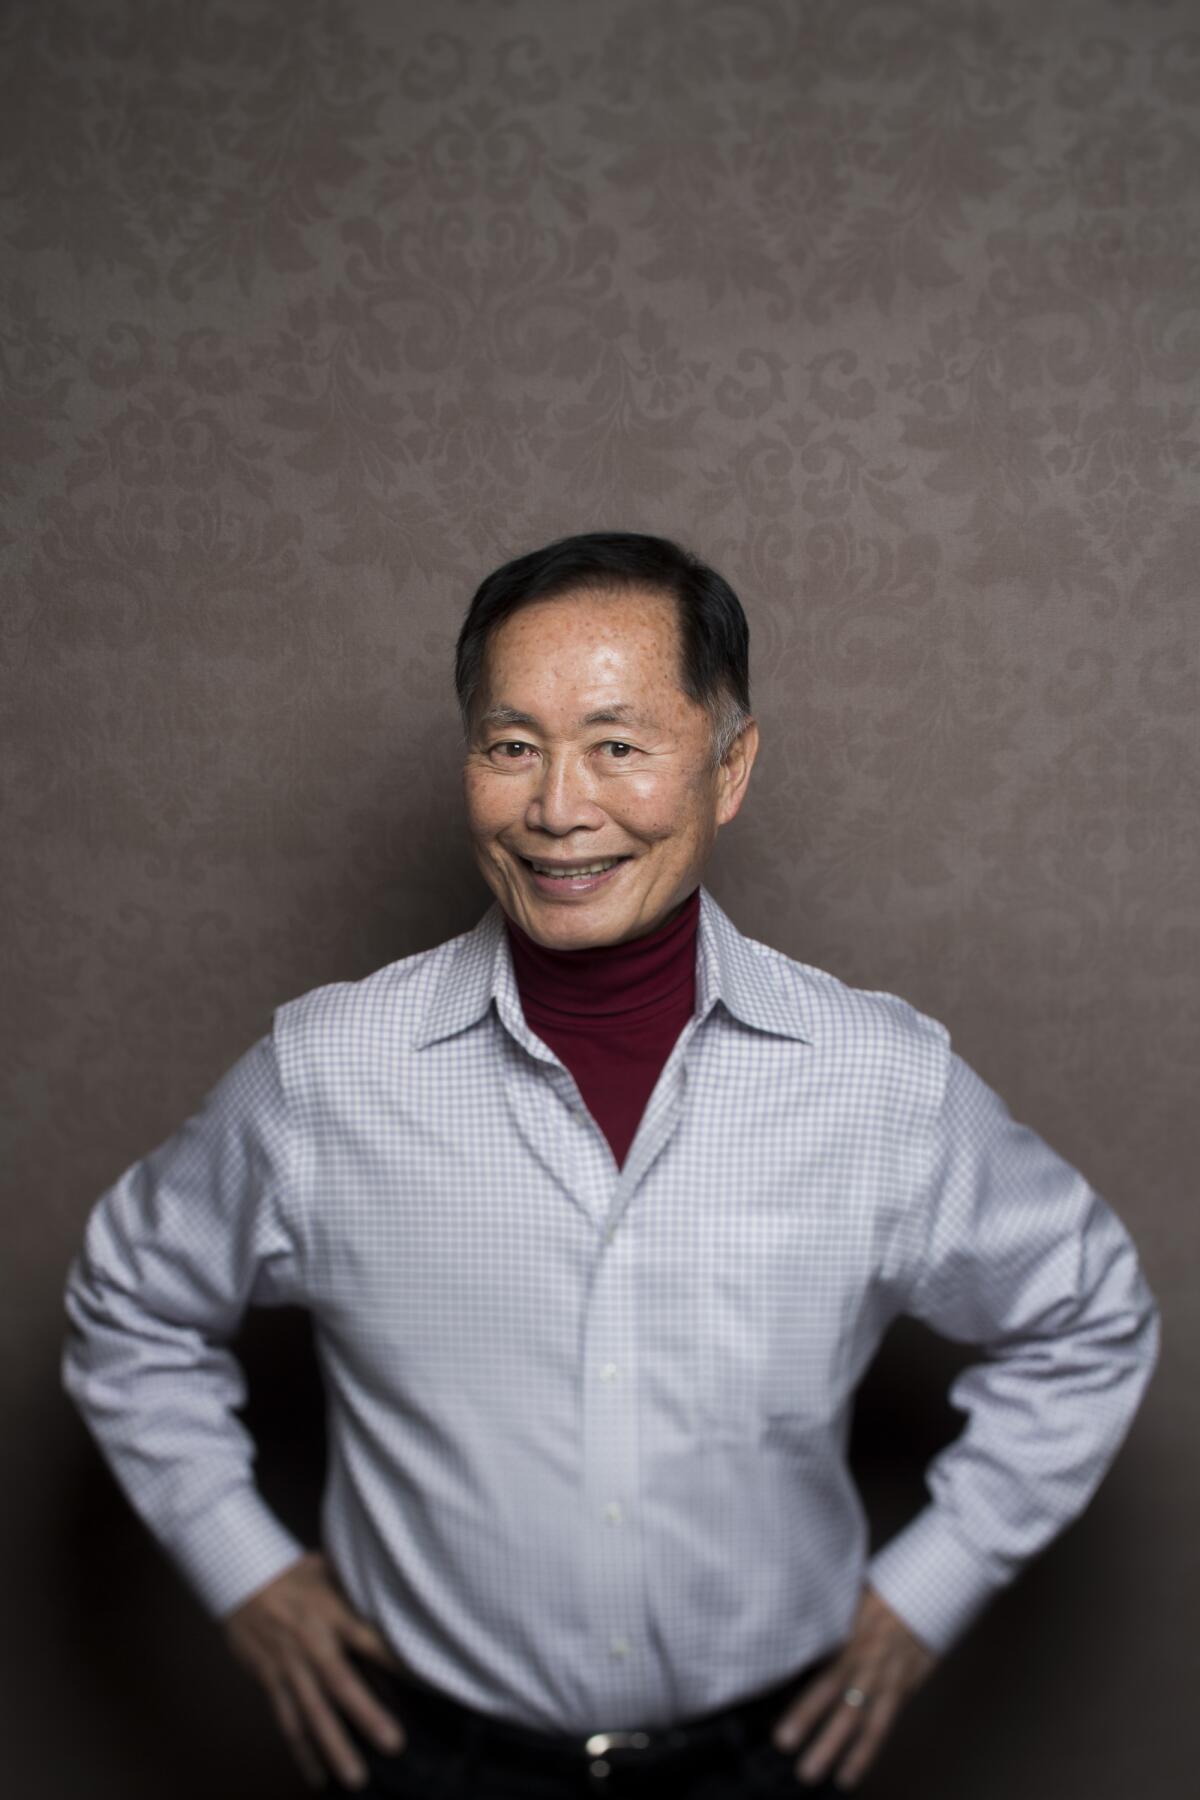 A man in a dress shirt smiles and poses with his hands on his hips